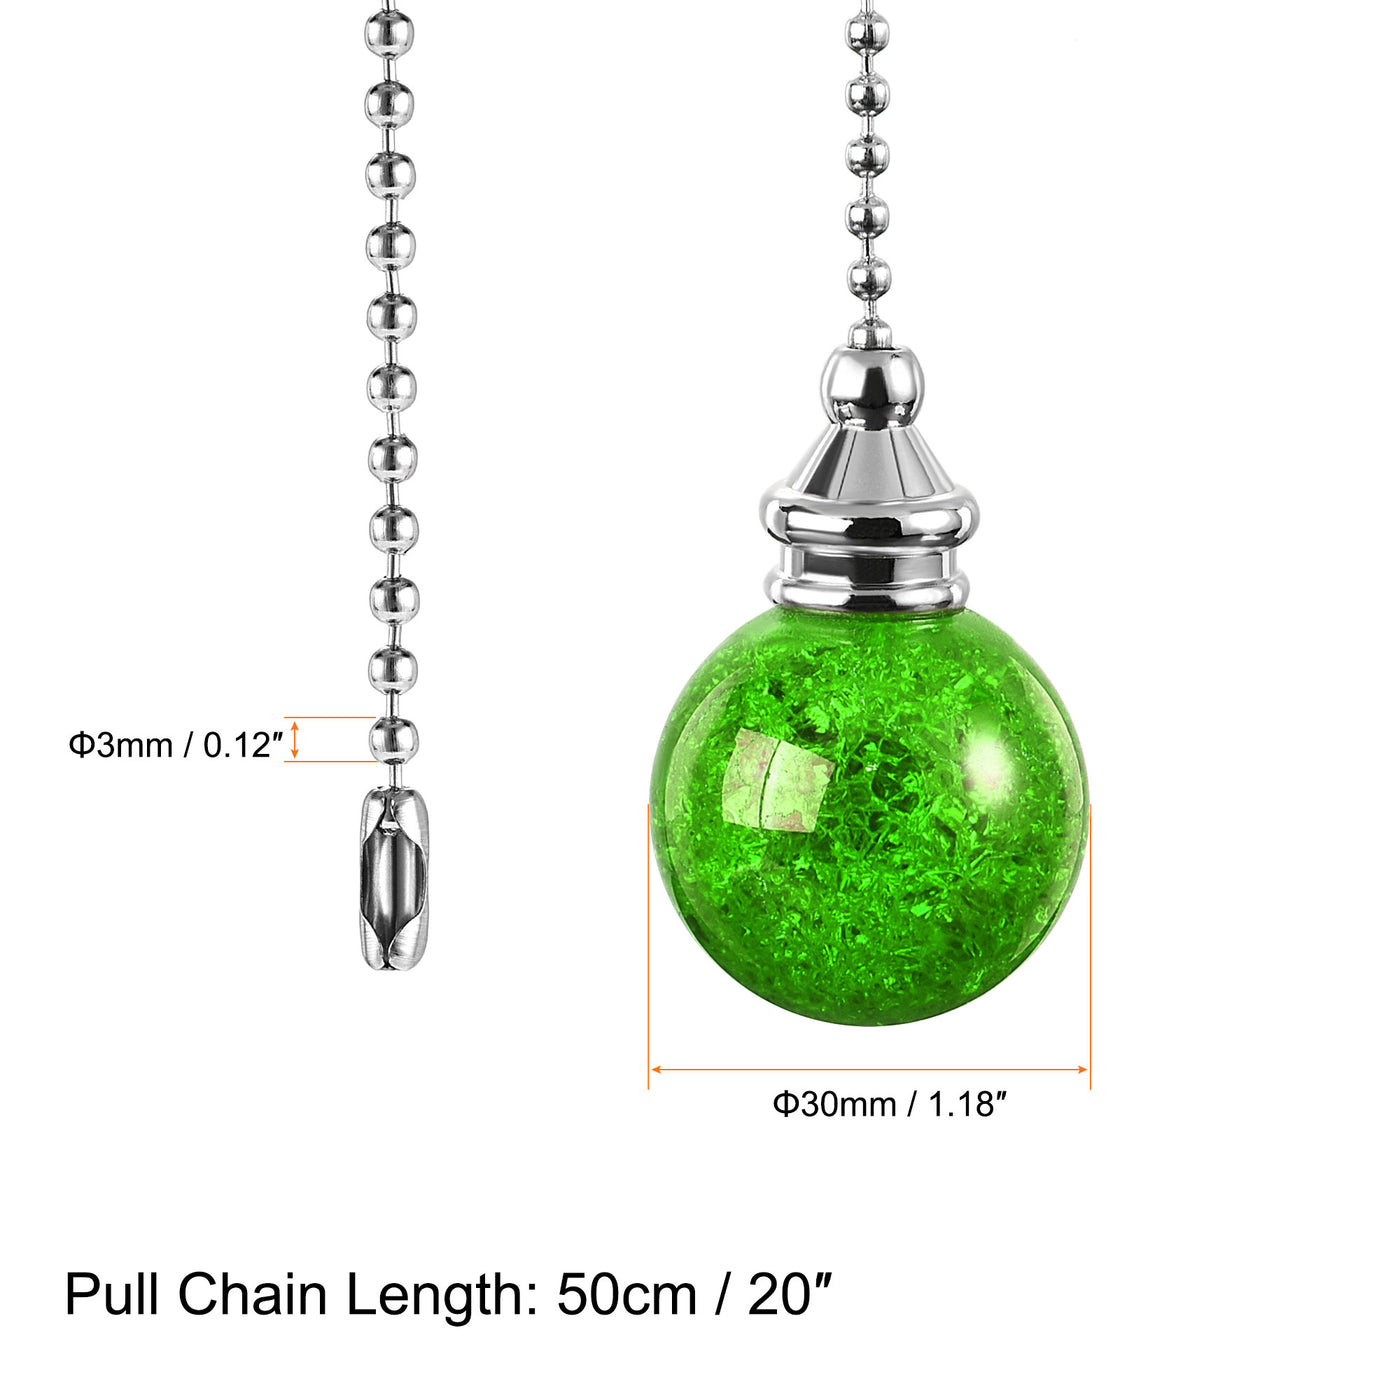 uxcell Uxcell 20 Inch Ceiling Fan Pull Chain, Decorative Crystal Fan Pull Chain Ornament Extension, 3mm Diameter Beaded 30mm Ice Cracked Ball Pendant, Green